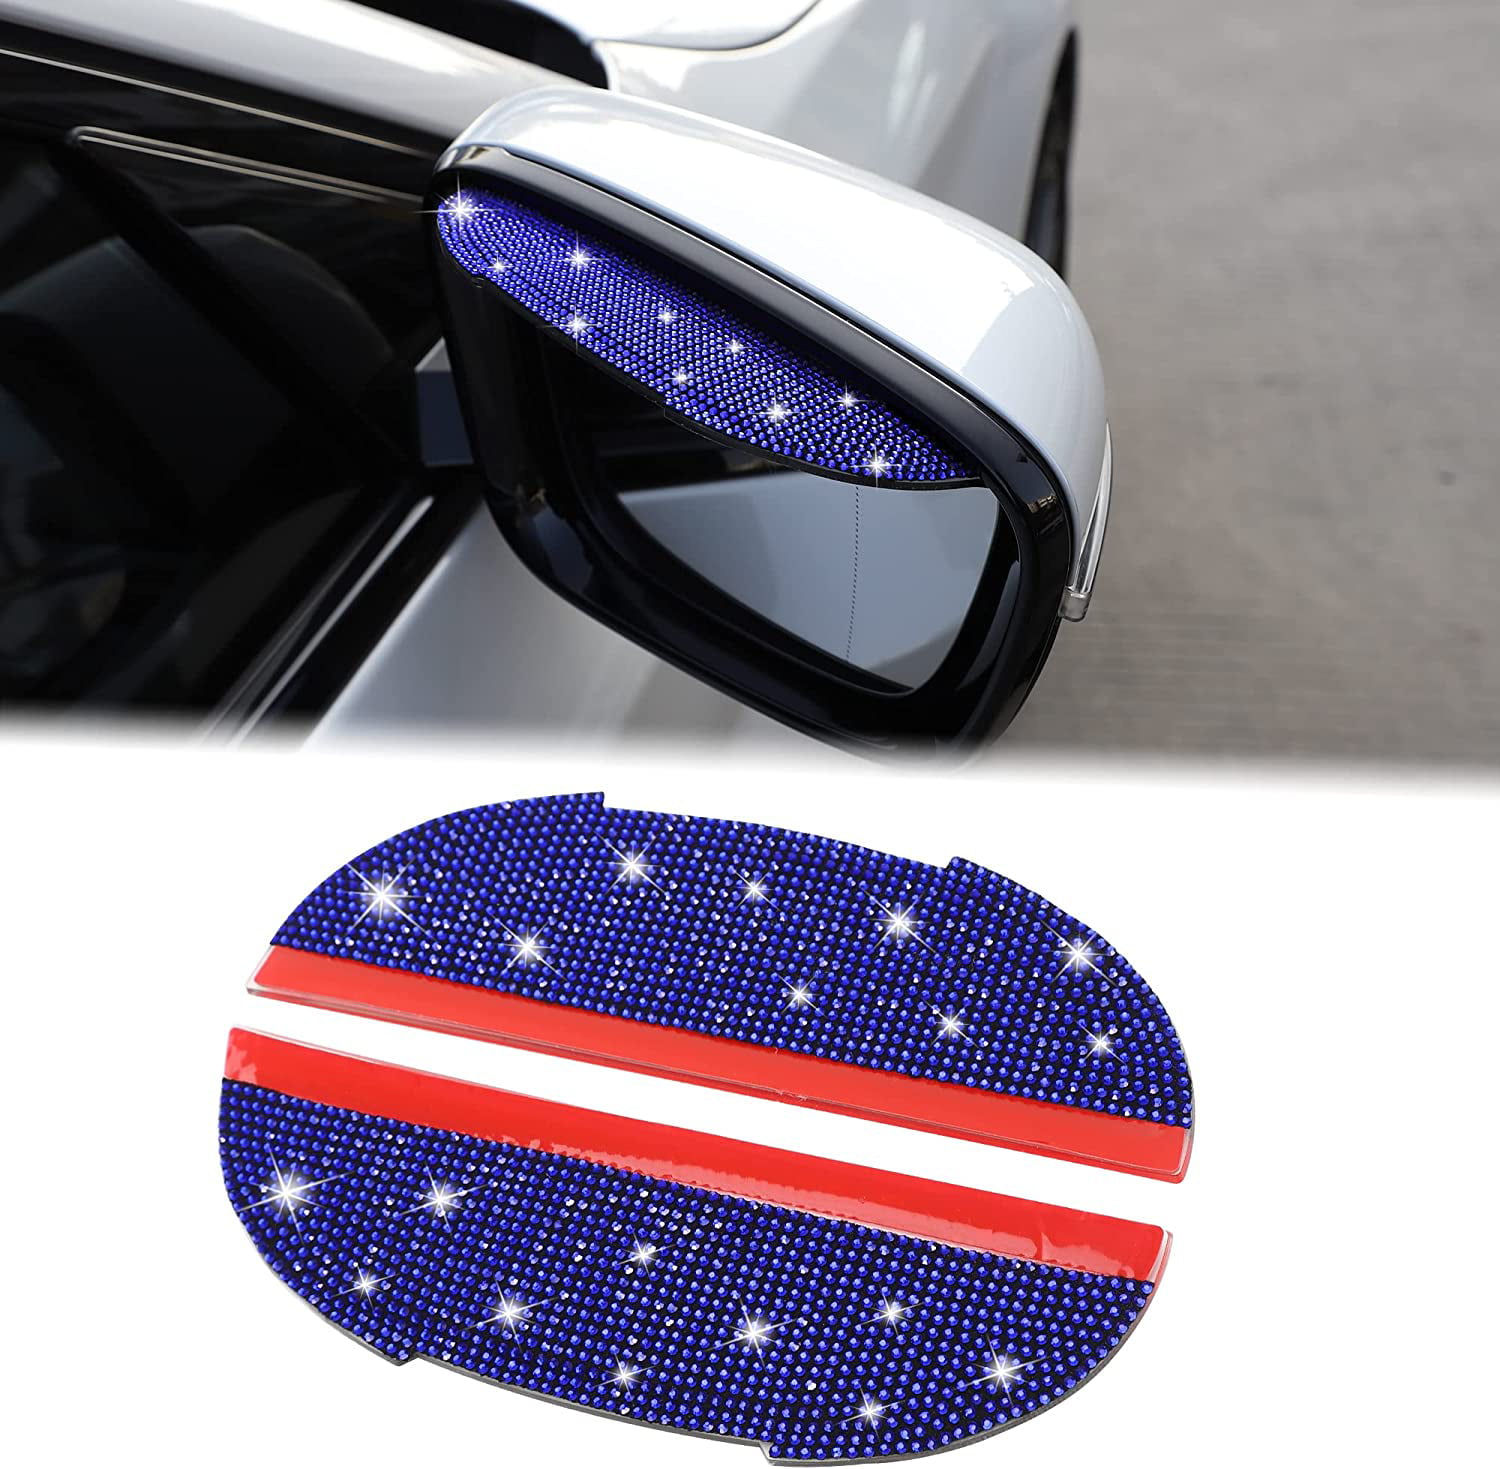  Pincuttee Mirror Rain Visor Eyebrow, Side Mirror Rain Guards,  Covers for Car Uniservial Fit 2 Pack : Automotive